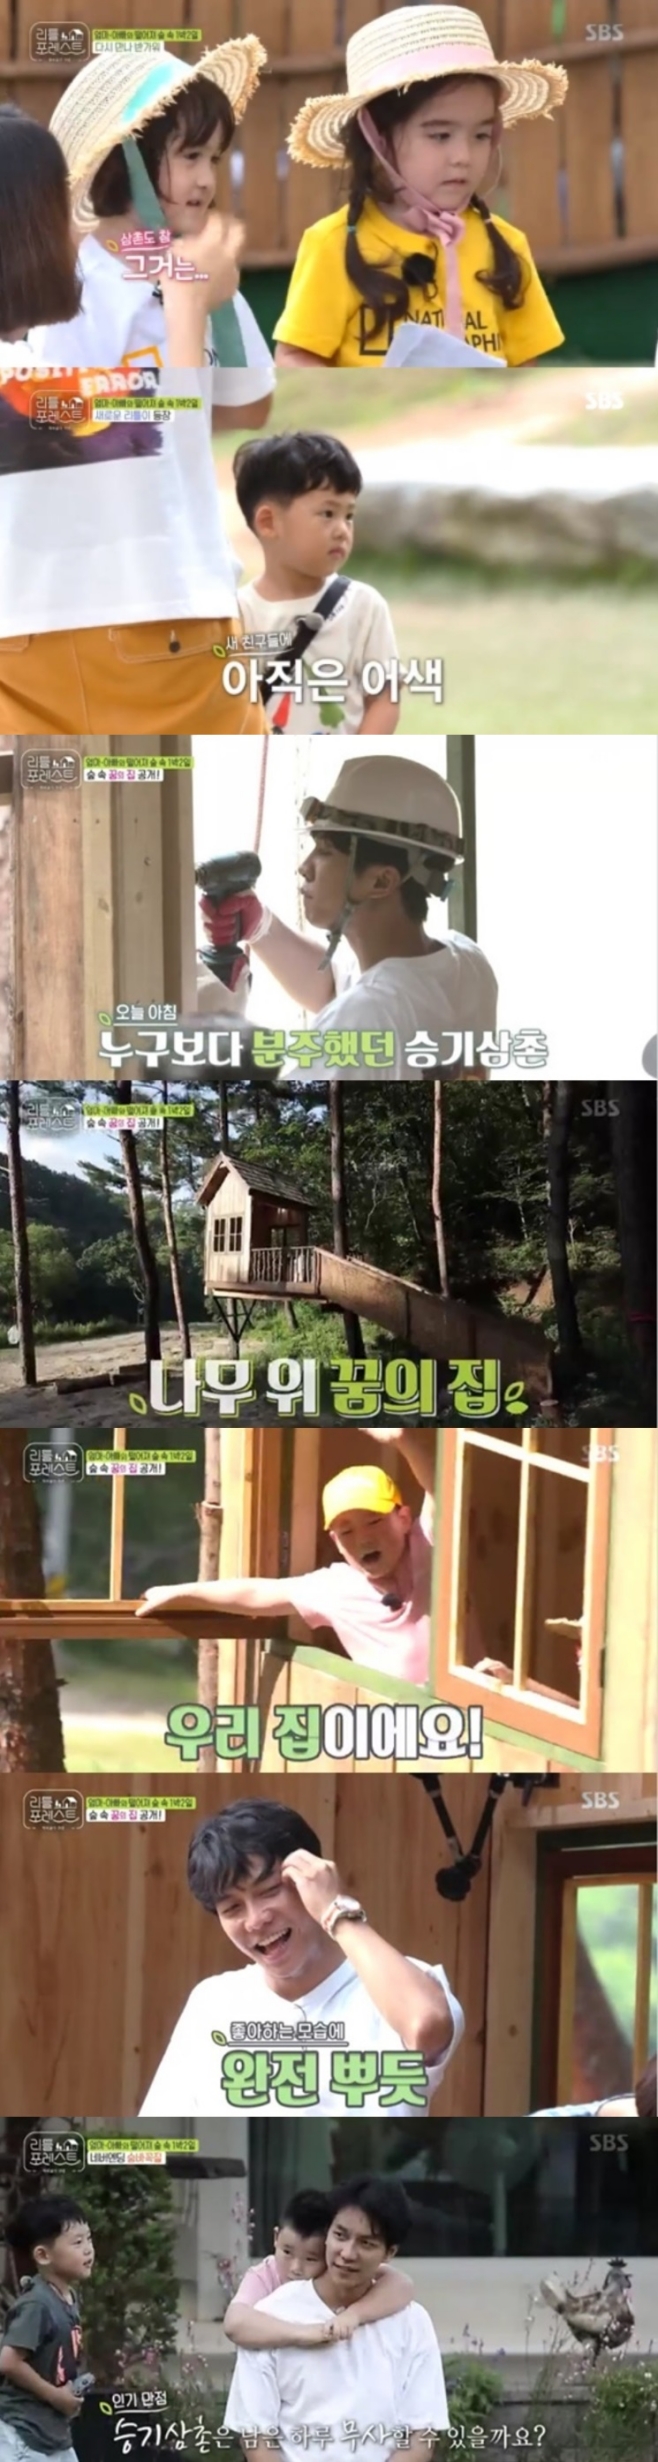 In Little Forest, Actor and Singer Lee Seung-gi produced Treehouse for Little Lee (children).In the SBS monthly entertainment program Little Forest broadcasted on the 26th, new Little boys joined the shooting.The members and the little ones who had a second meeting in the twigbangol welcomed each other with a more relaxed look.Lee Han, who was ashamed of not being able to approach Brooke last week, laughed again this time, and Brooke and Grace gave a picture gift to the members of Little Forest and added warmth.Brookflower Lee Seo-jin laughed at Brookes surprise gift, and Jung So-min was happy that he was heartbreaking.Especially, it was Lee Seung-gis Treehouse opening that attracted Eye-catching on this day.The children found blueberries as soon as they came to the spot, but they were disappointed to hear that blueberries had all fallen to the ground due to rain.However, Lee Seung-gi raised expectations by spreading whispers to children that Treehouse, Ive done it to turn their attention to children.The effect was perfect: Littles smiled broadly at the newly built Treehouse, and Lee Seung-gi, who had been involved in the production himself, showed pride.With Lees suggestion, Little began to decorate their homes with re-Rys found in nature, and the more beautiful Treehouse was completed.At the end of the broadcast, Lee Seung-gis Hide and Seek with Little caught Eye-catching.As everywhere in the shoot becomes a Hide and Seek place, Little Lees shouted as they played in nature.The new Little showed up in a tired appearance and created Lee Han and a pleasant chemistry, but Lee Seung-gi was exhausted and Lee Seo-jin told Lee Seung-gi, You will fall.Little one by one showed interest in Hide and Seek, and eventually Lee Seung-gi was expected to fall into Hide and Seek Hell, which made interest in the 6th Little Forest broadcast on the 27th.The sixth episode of Little Forest airs tonight at 10 p.m.